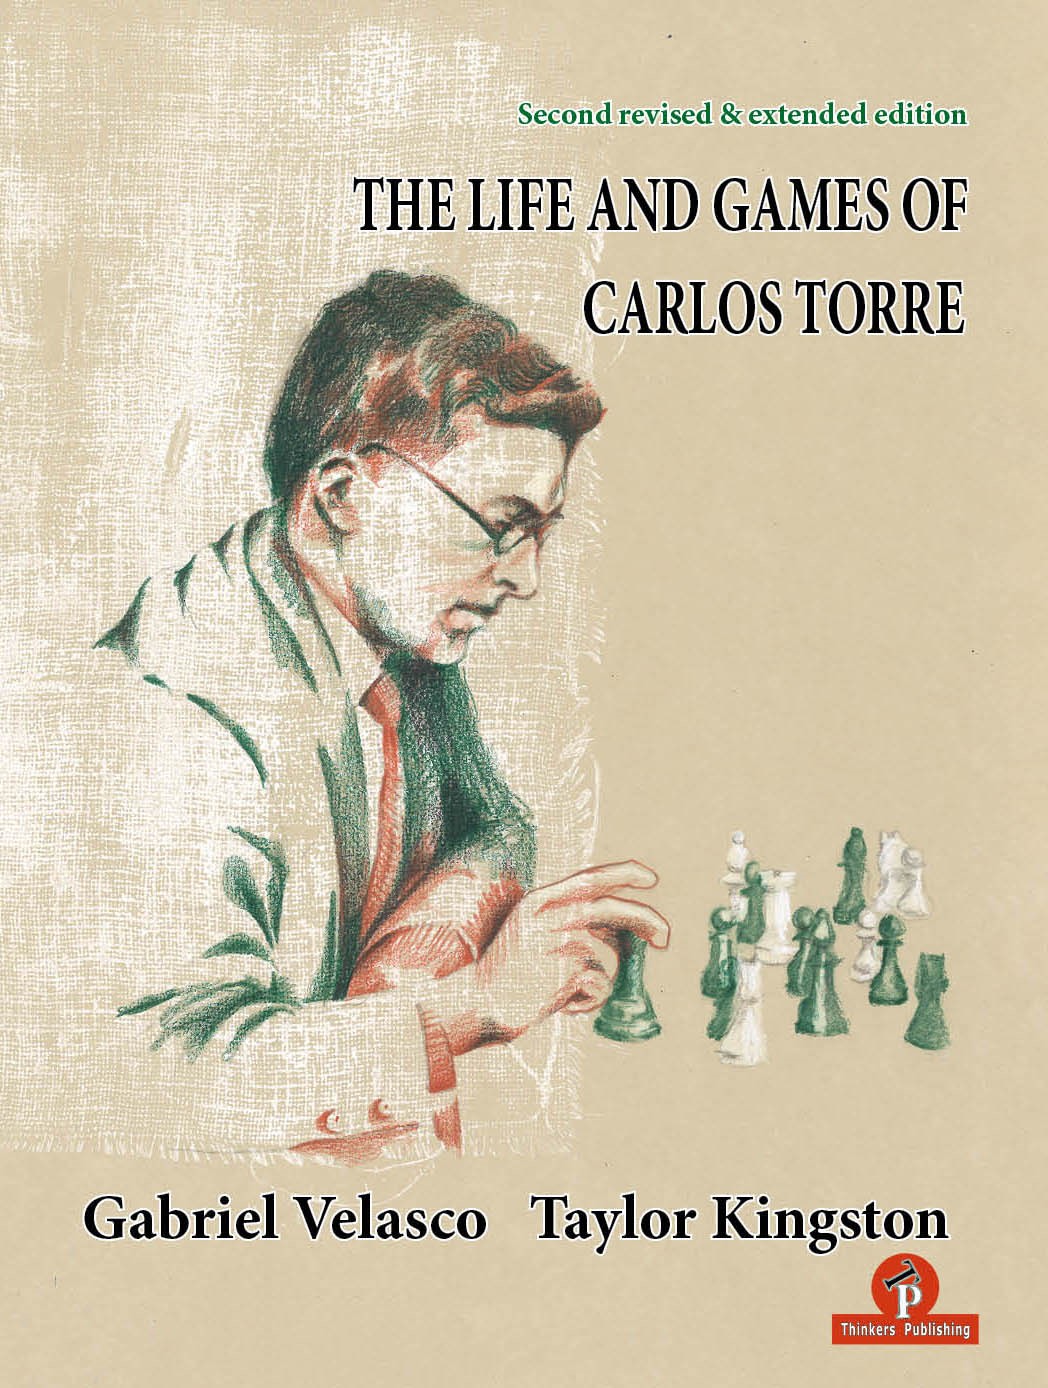 Velasco & Kingston: The Life and Games of Carlos Torre